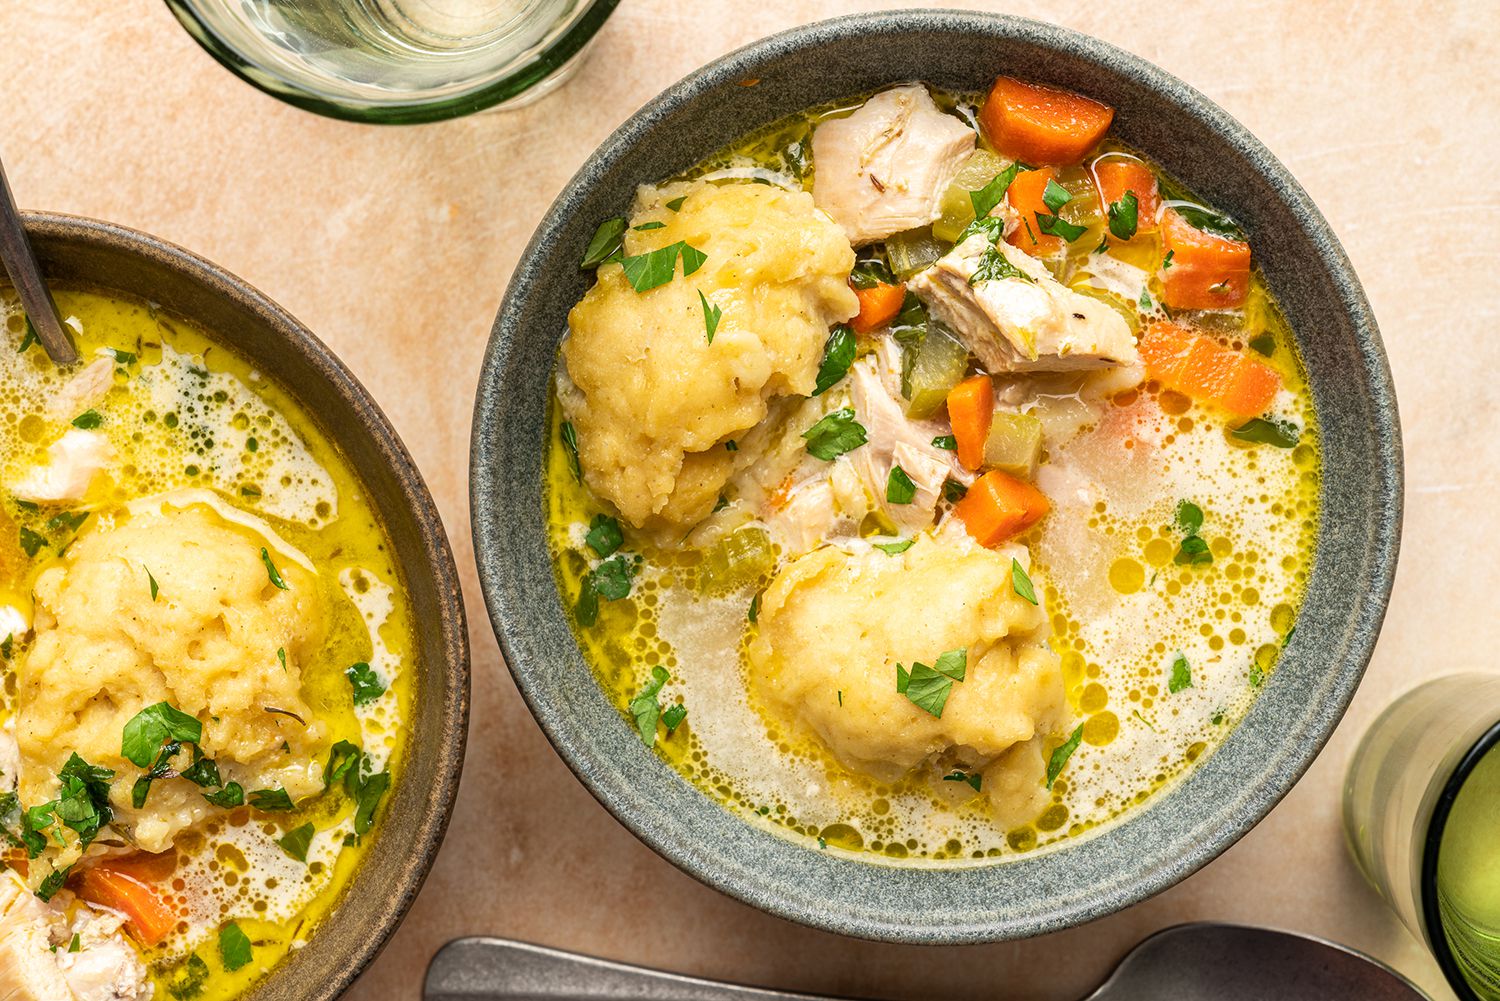 Stick-to-Your-Ribs Chicken and Dumplings